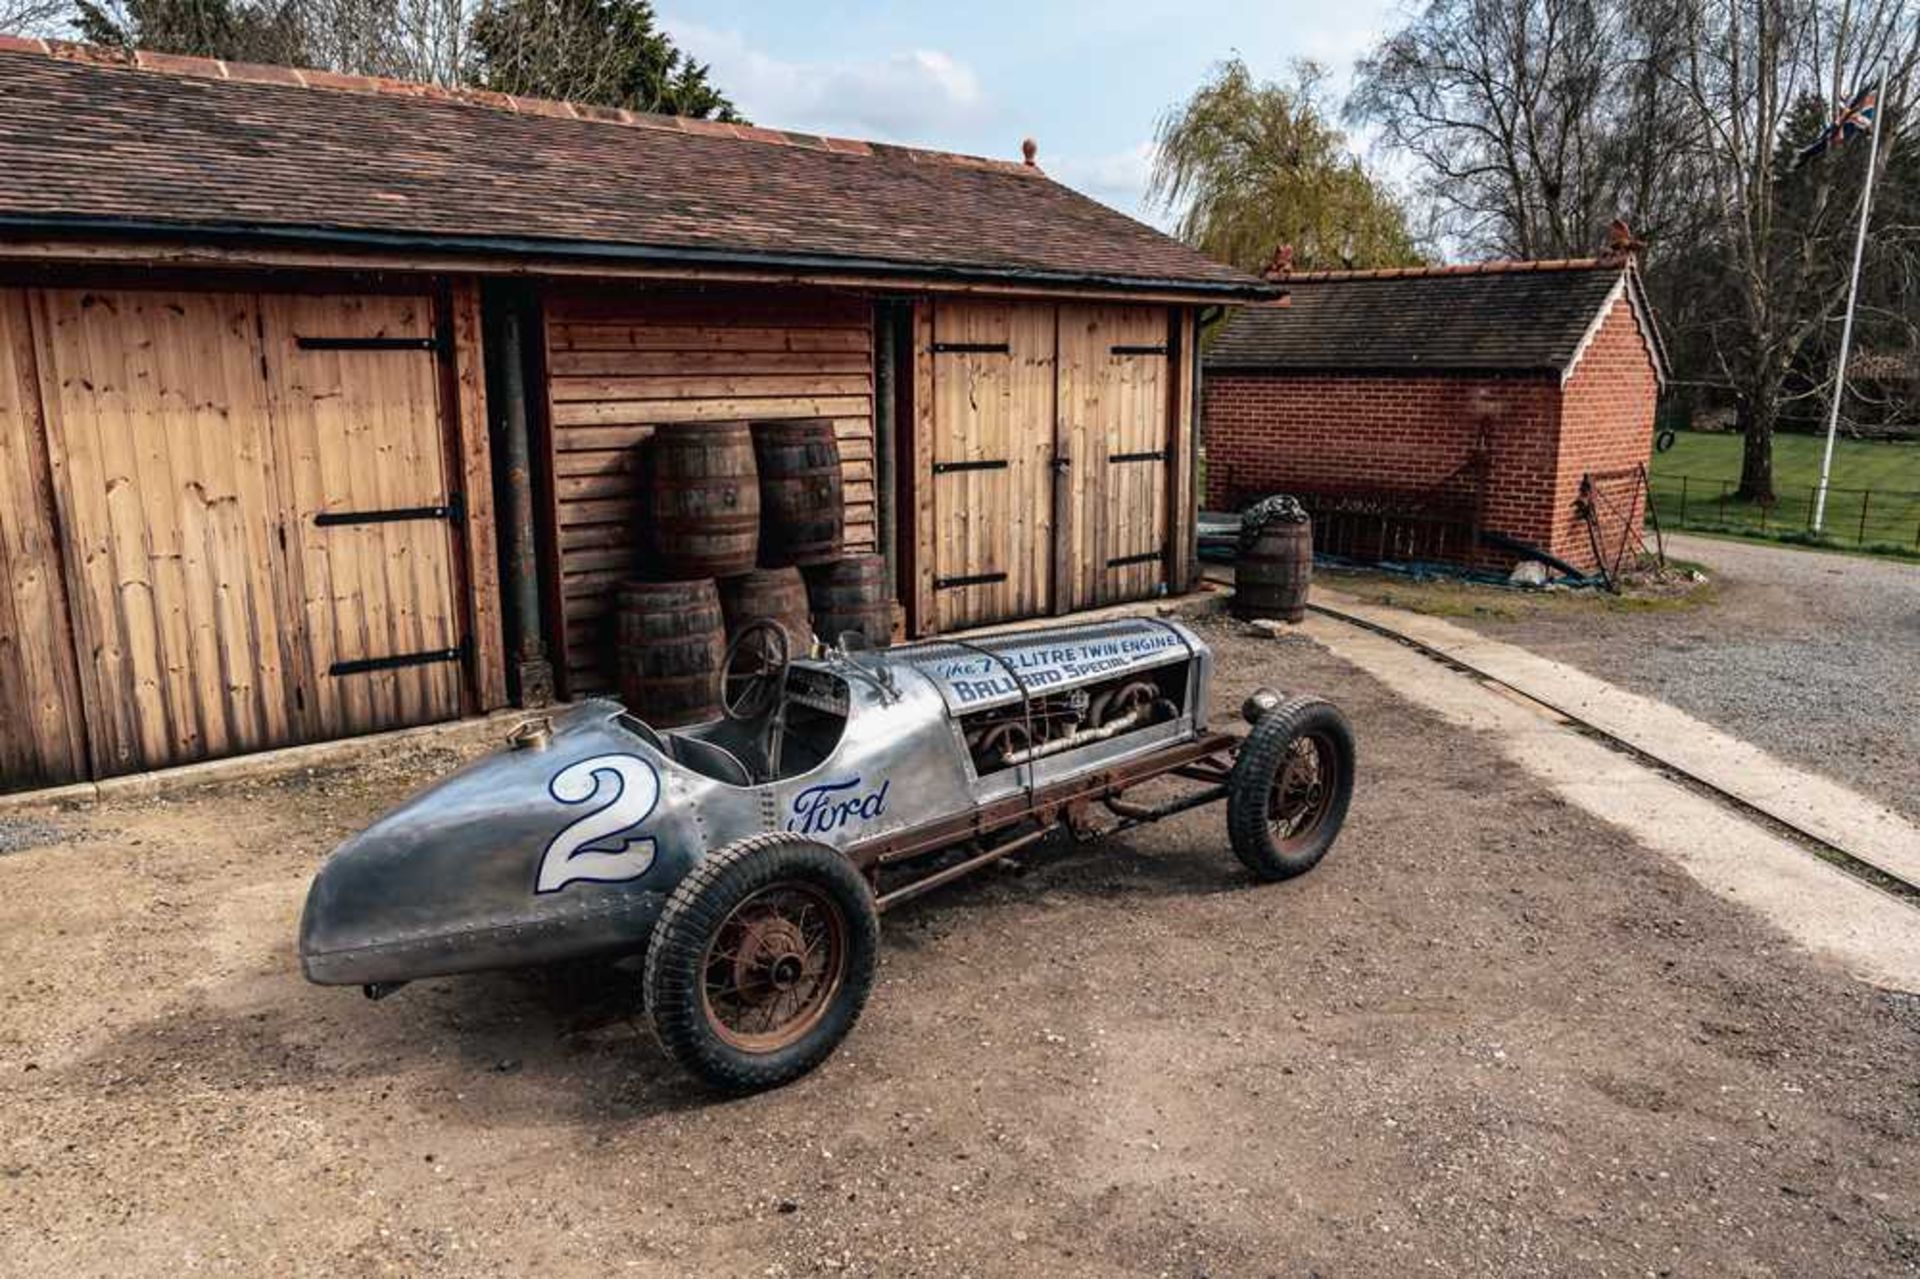 1930 Ford Model A "The Ballard Special" Speedster One off, bespoke built twin-engined pre-war racing - Image 16 of 94